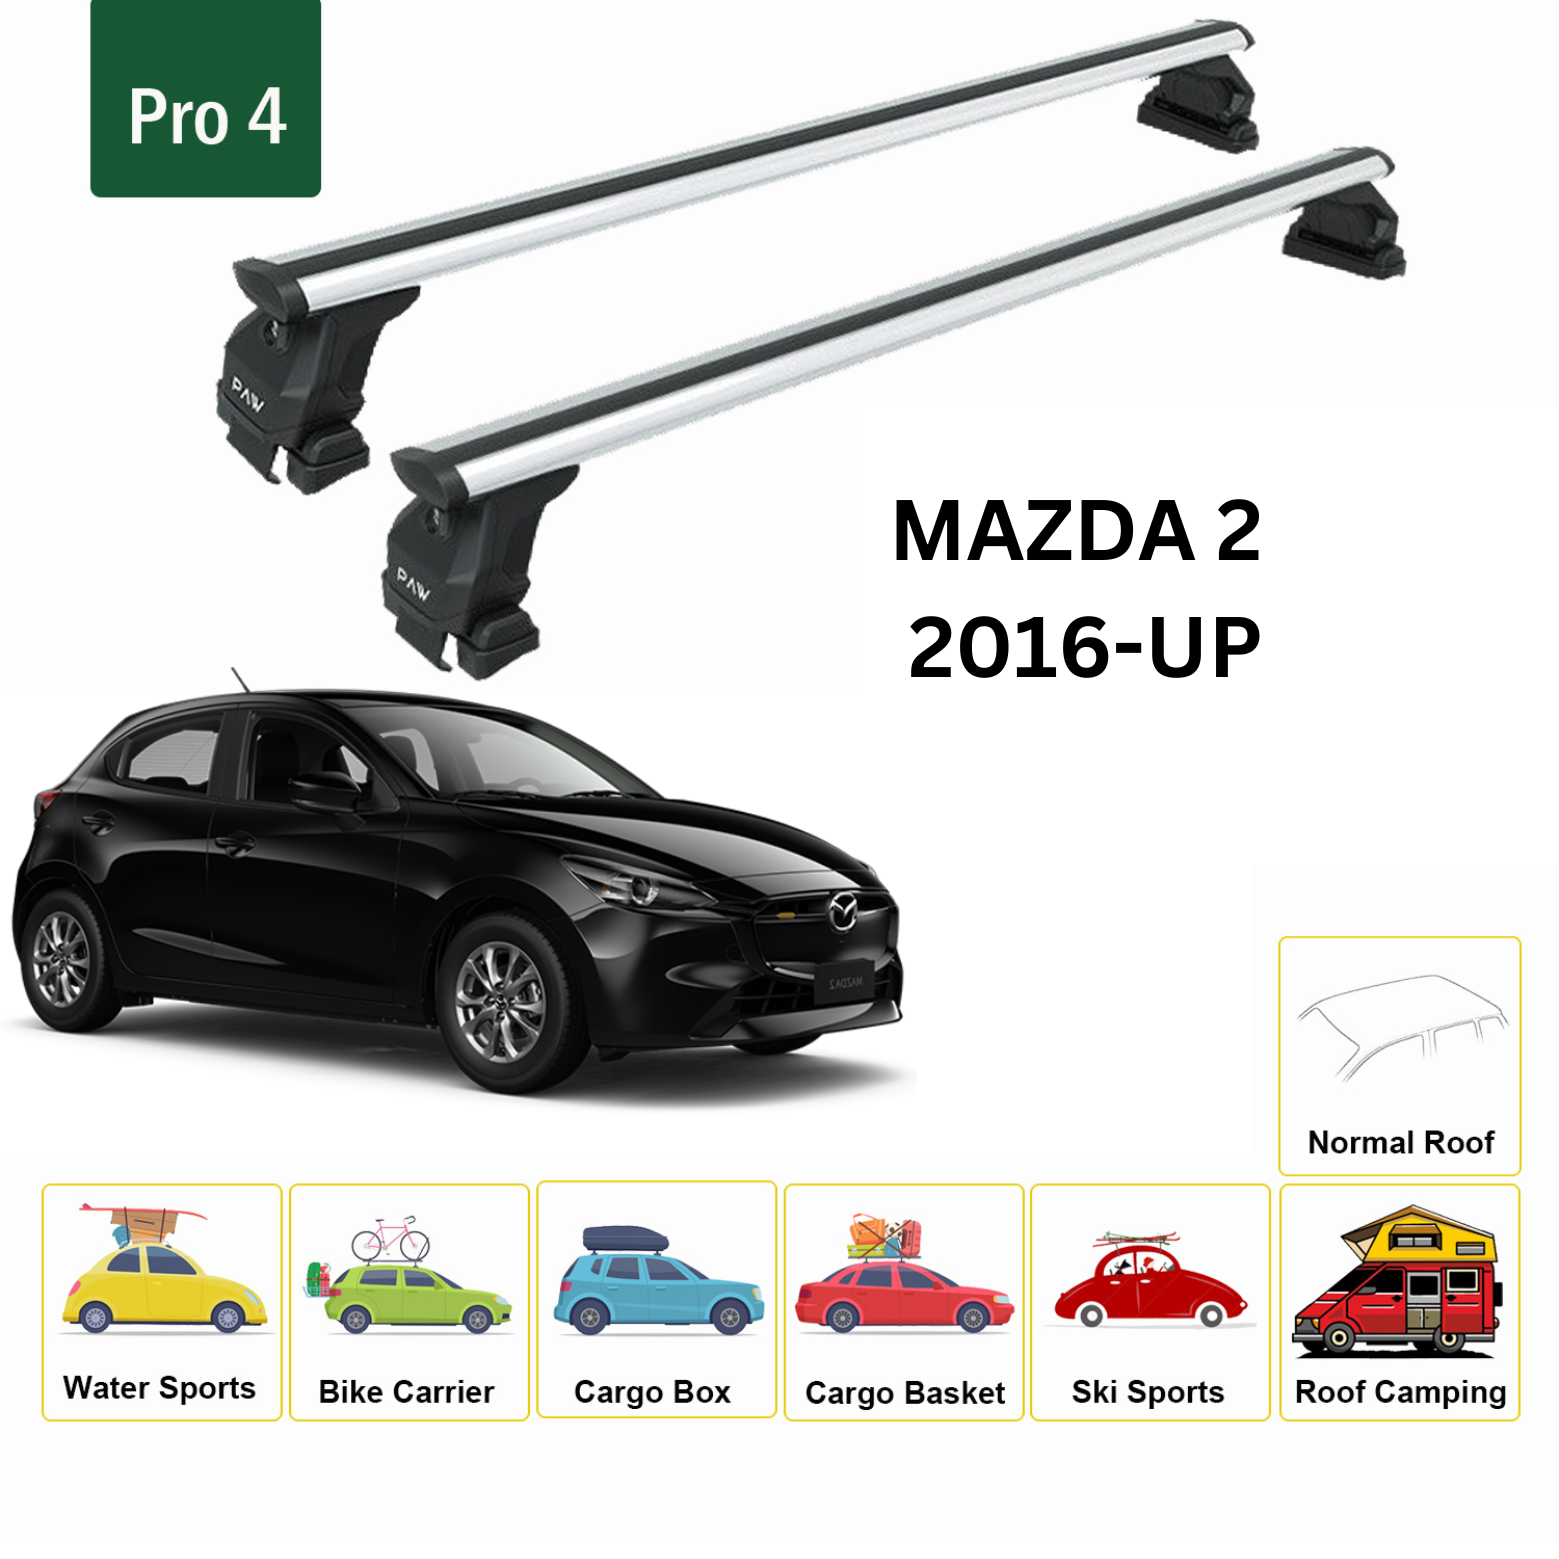 For Mazda 2 Series 2016-Up Roof Rack Cross Bars Normal Roof Alu Silver